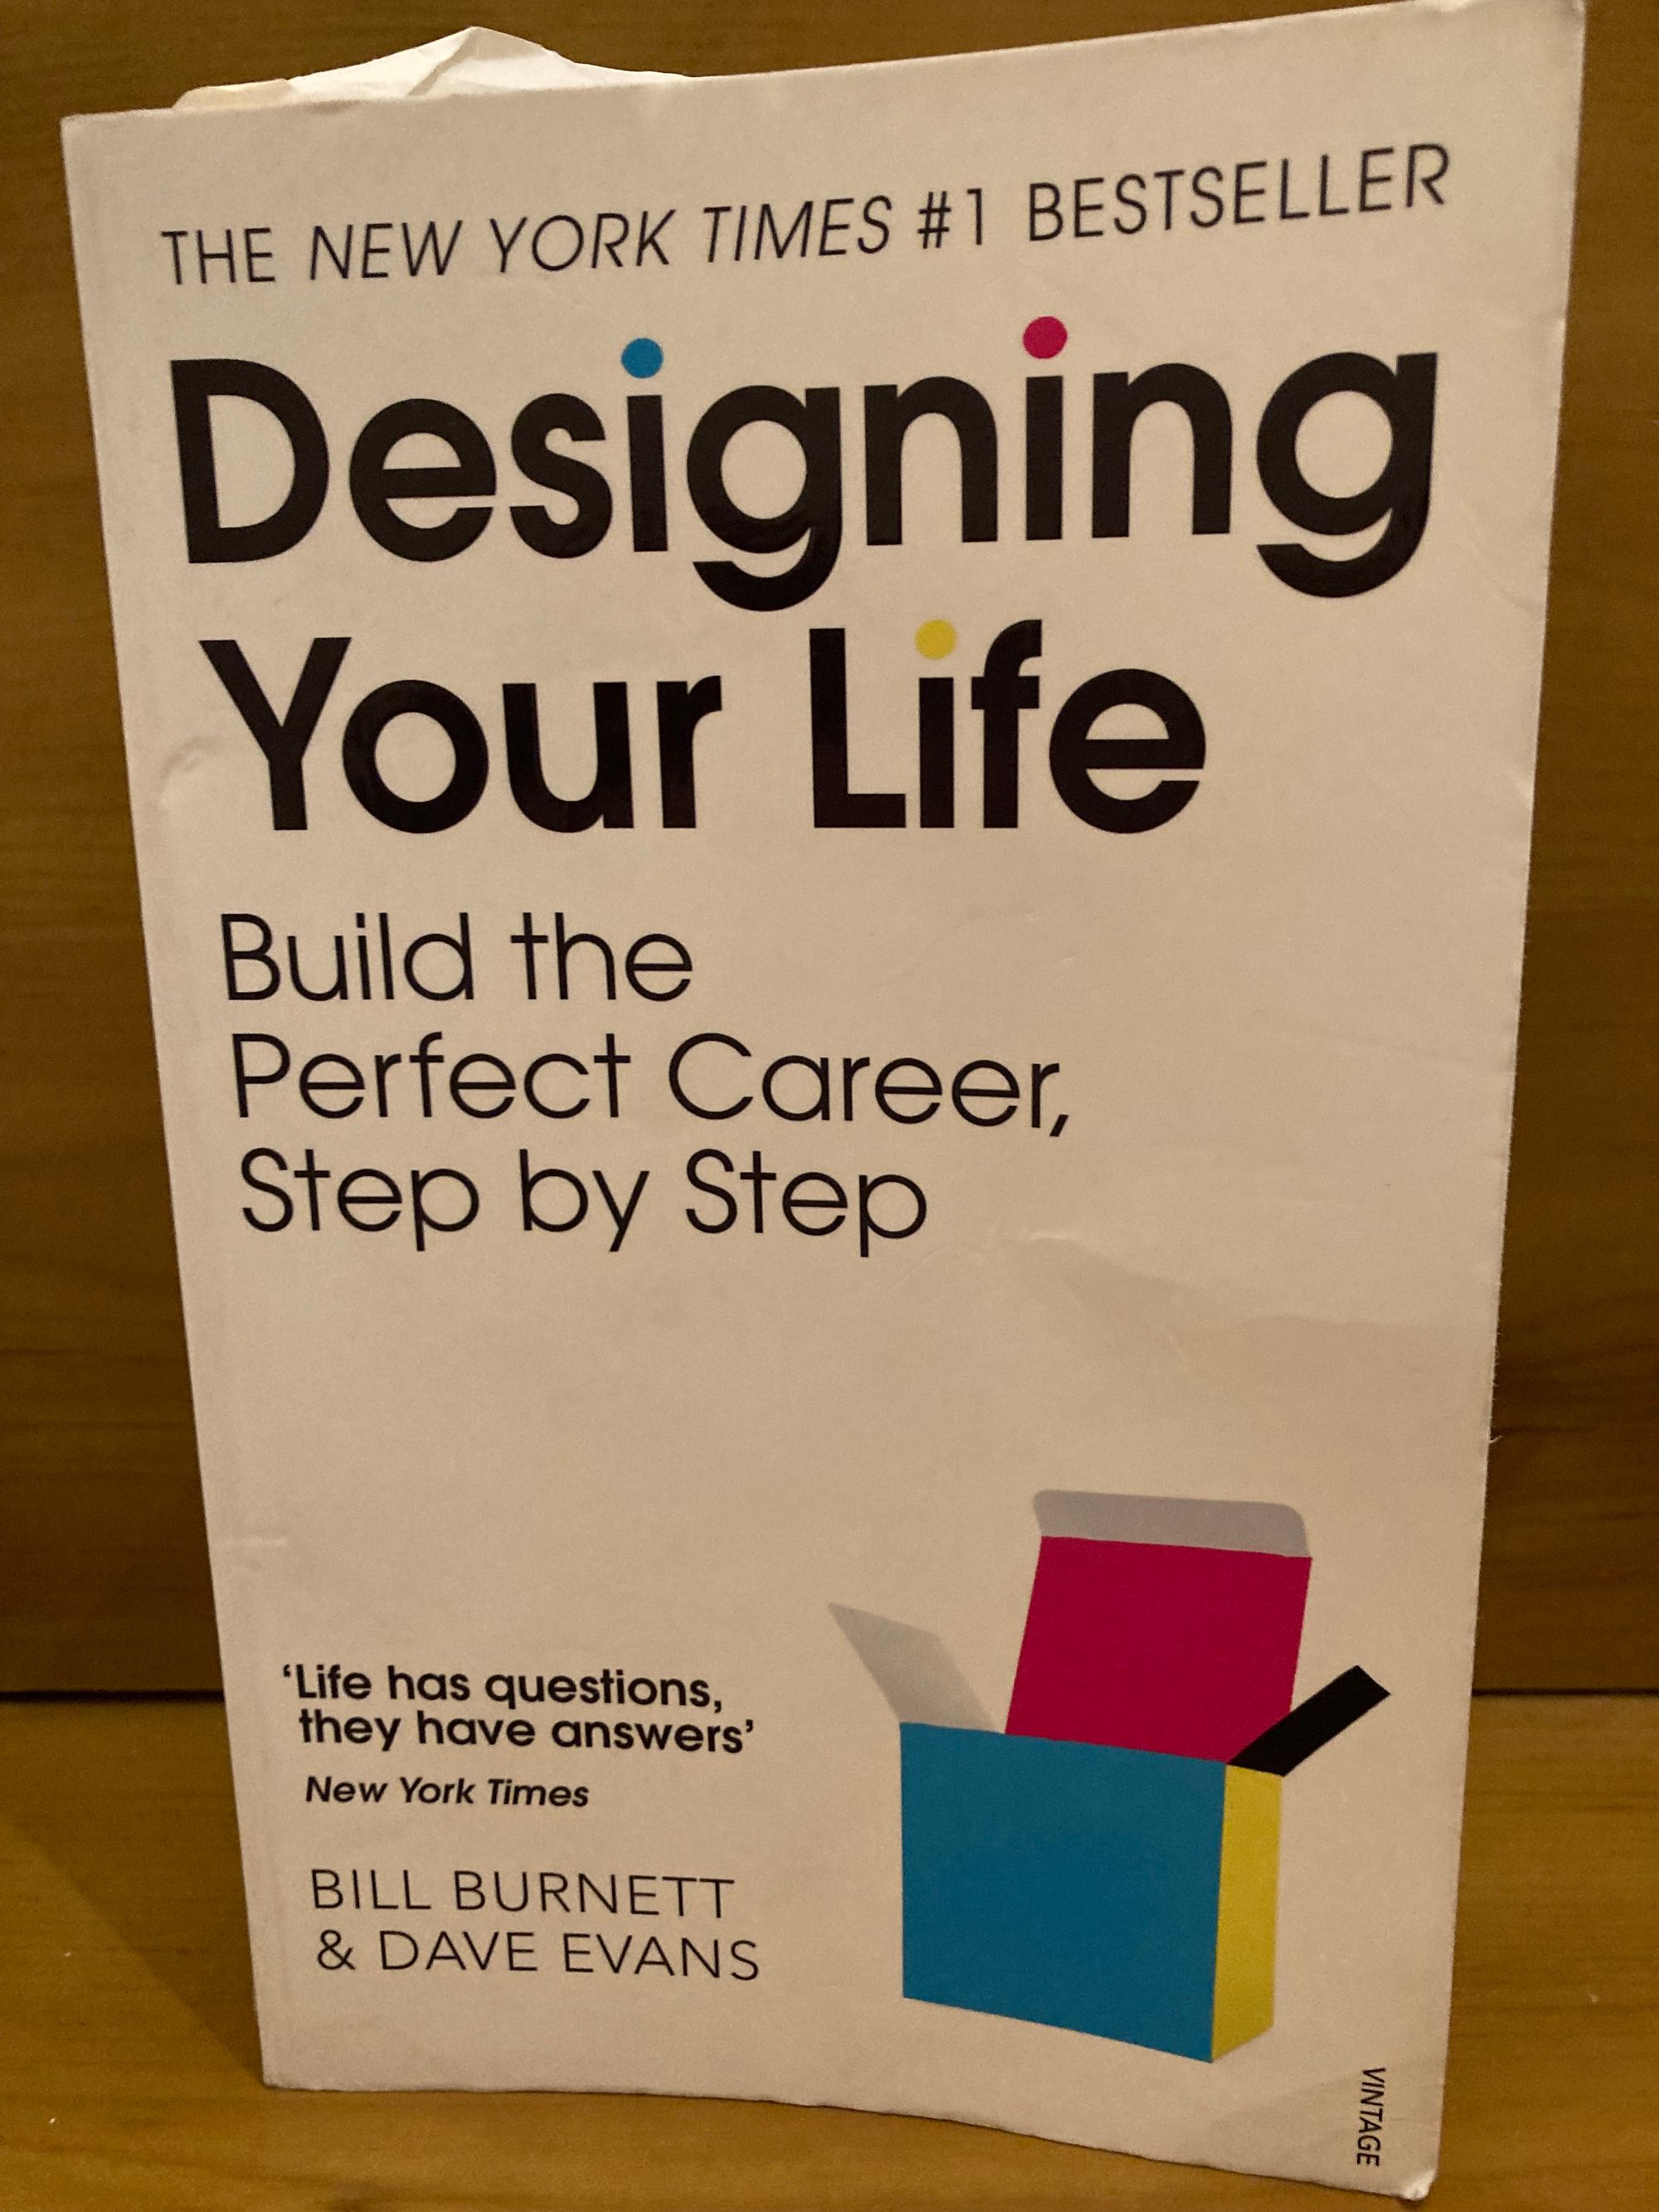 Photo of the cover of Designing Your Life by Bill Burnett and Dave Evans